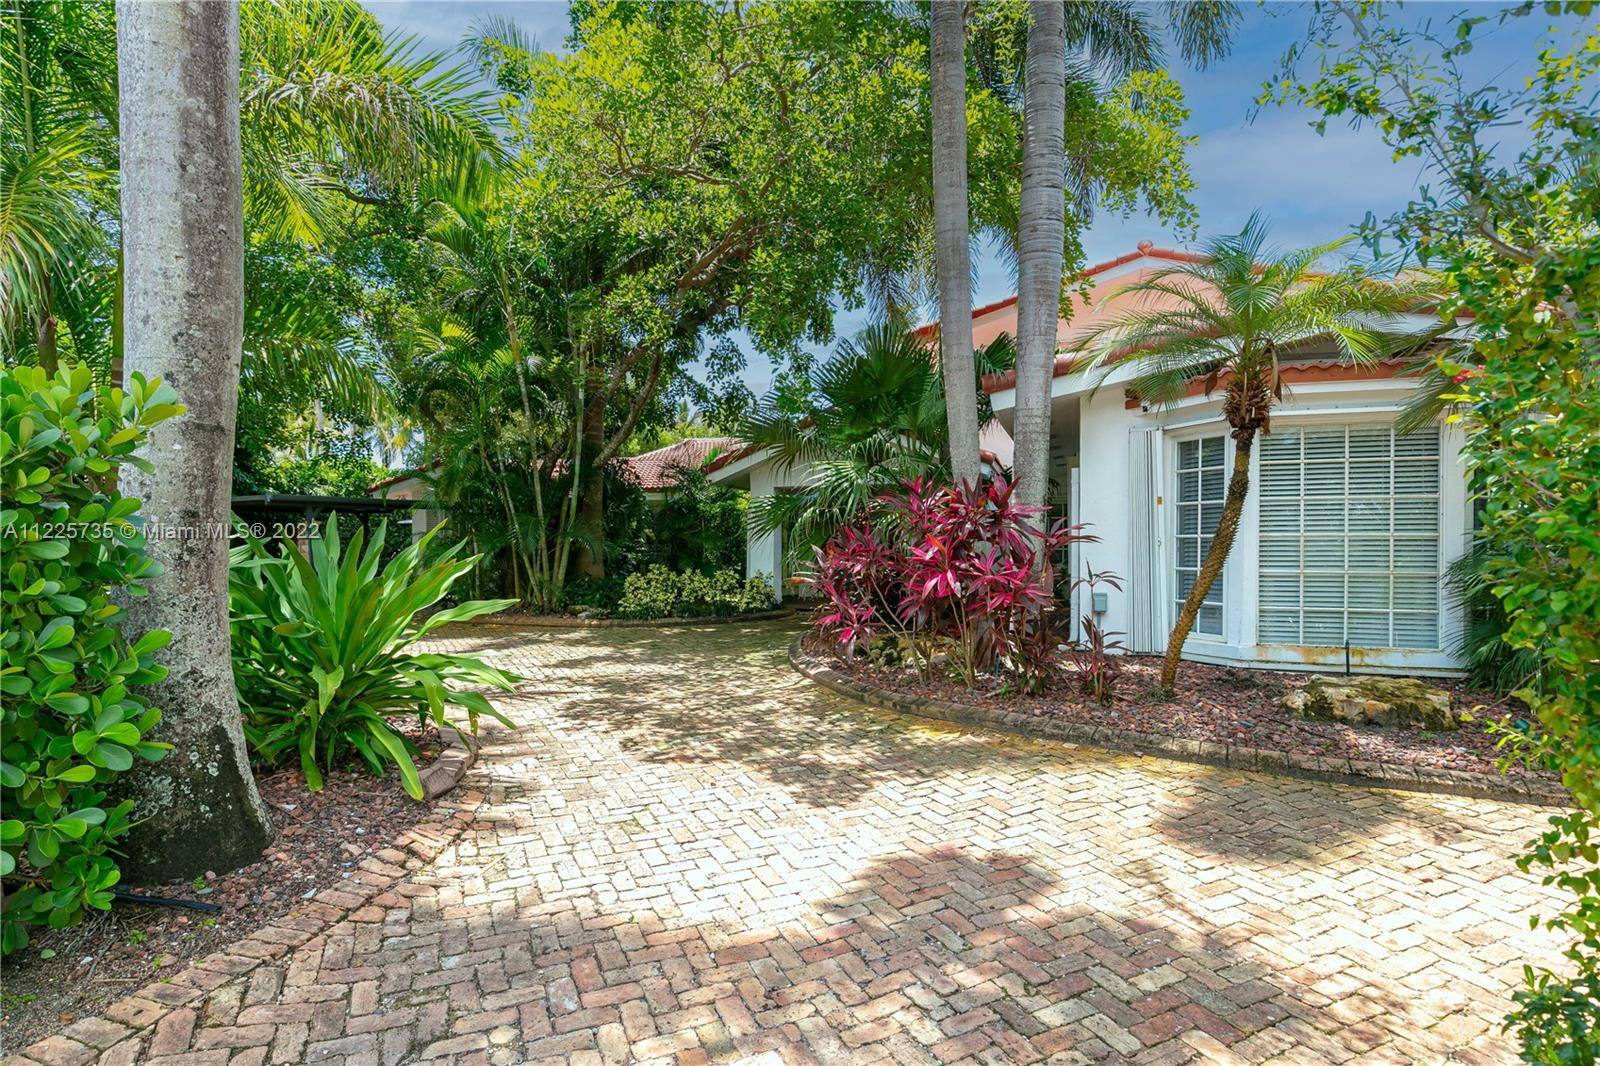 Located in magnificent Key Biscayne, this gorgeous home embodies island style and relaxation.